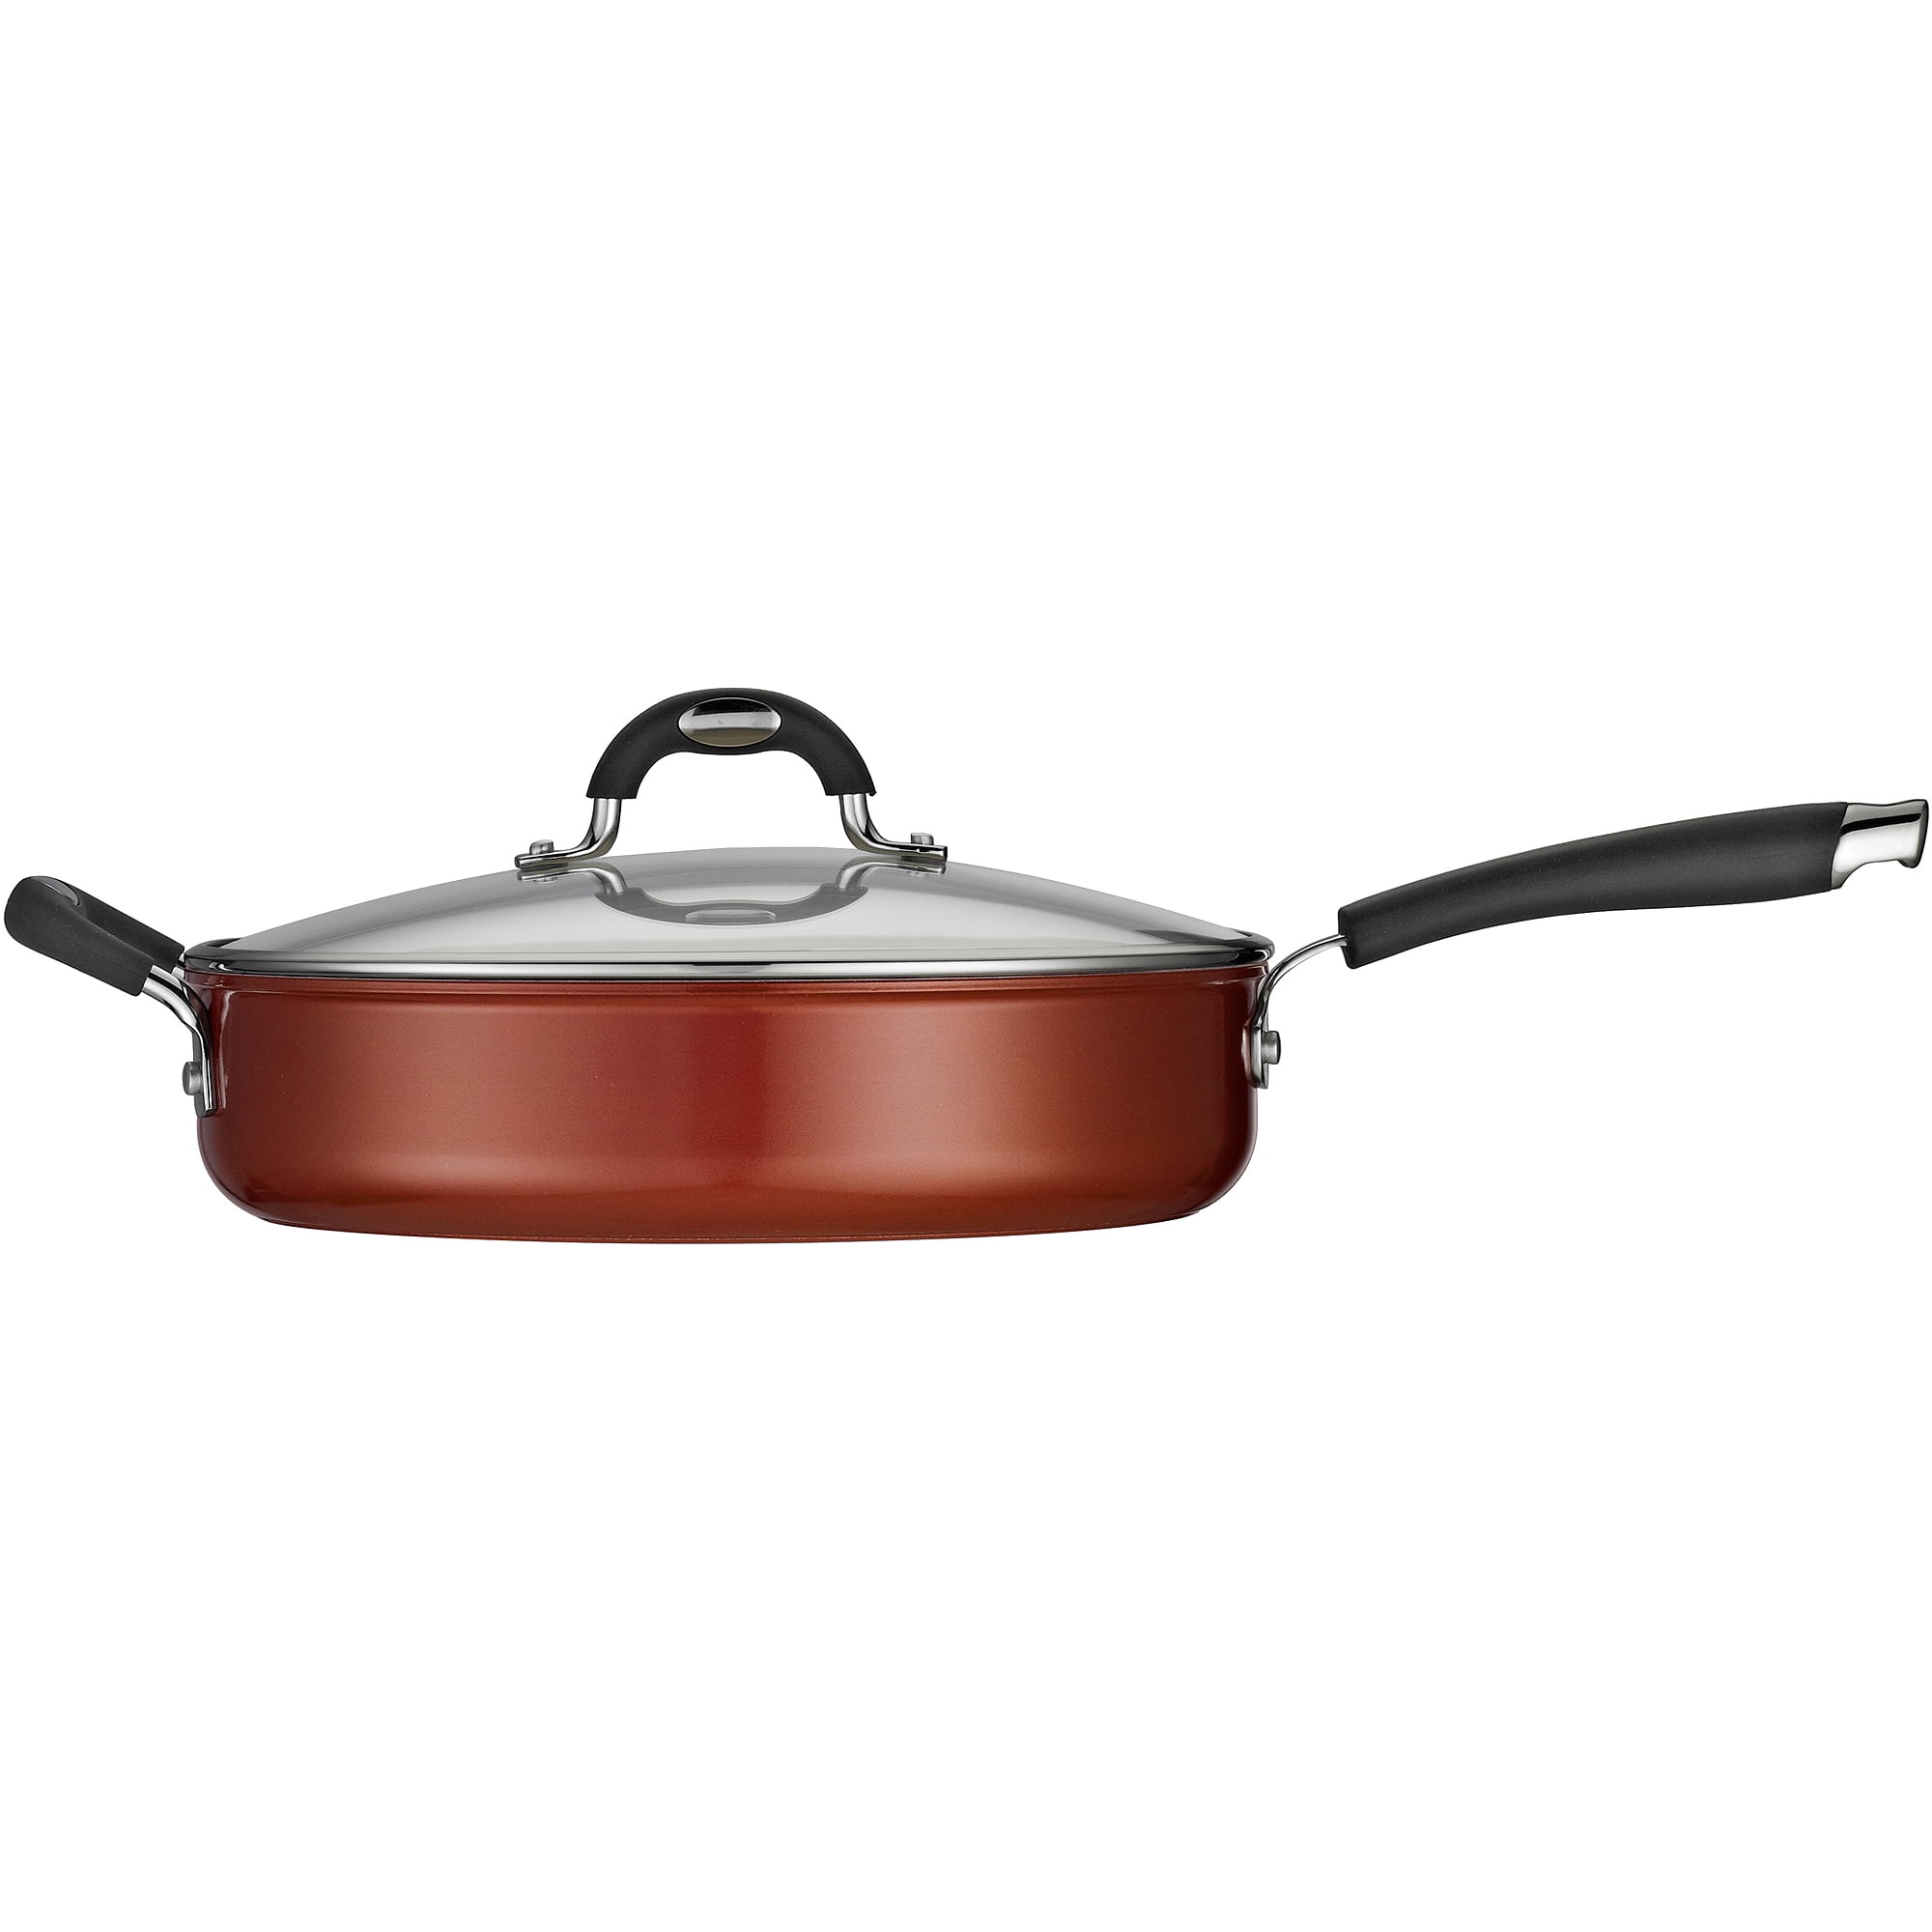 Zyliss Cookware 11 Nonstick Saute Pan with Covered Lid